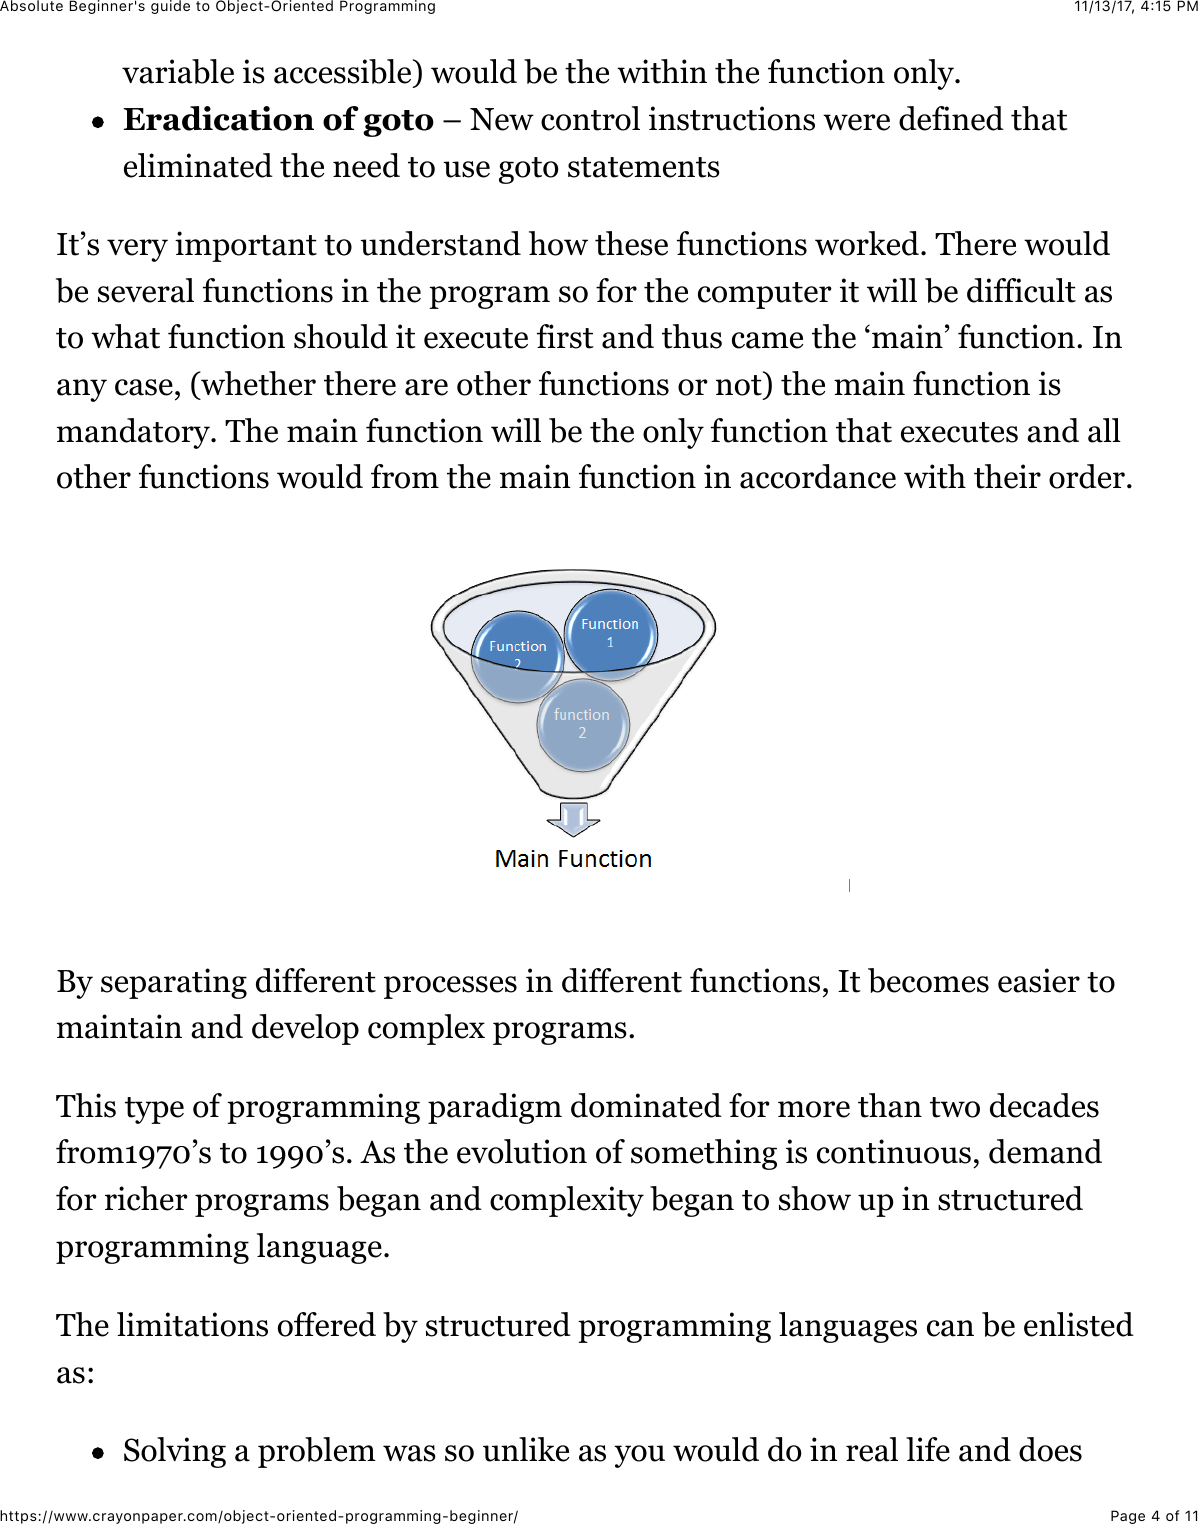 Page 4 of 11 - Absolute Beginner's Guide To Object-Oriented Programming